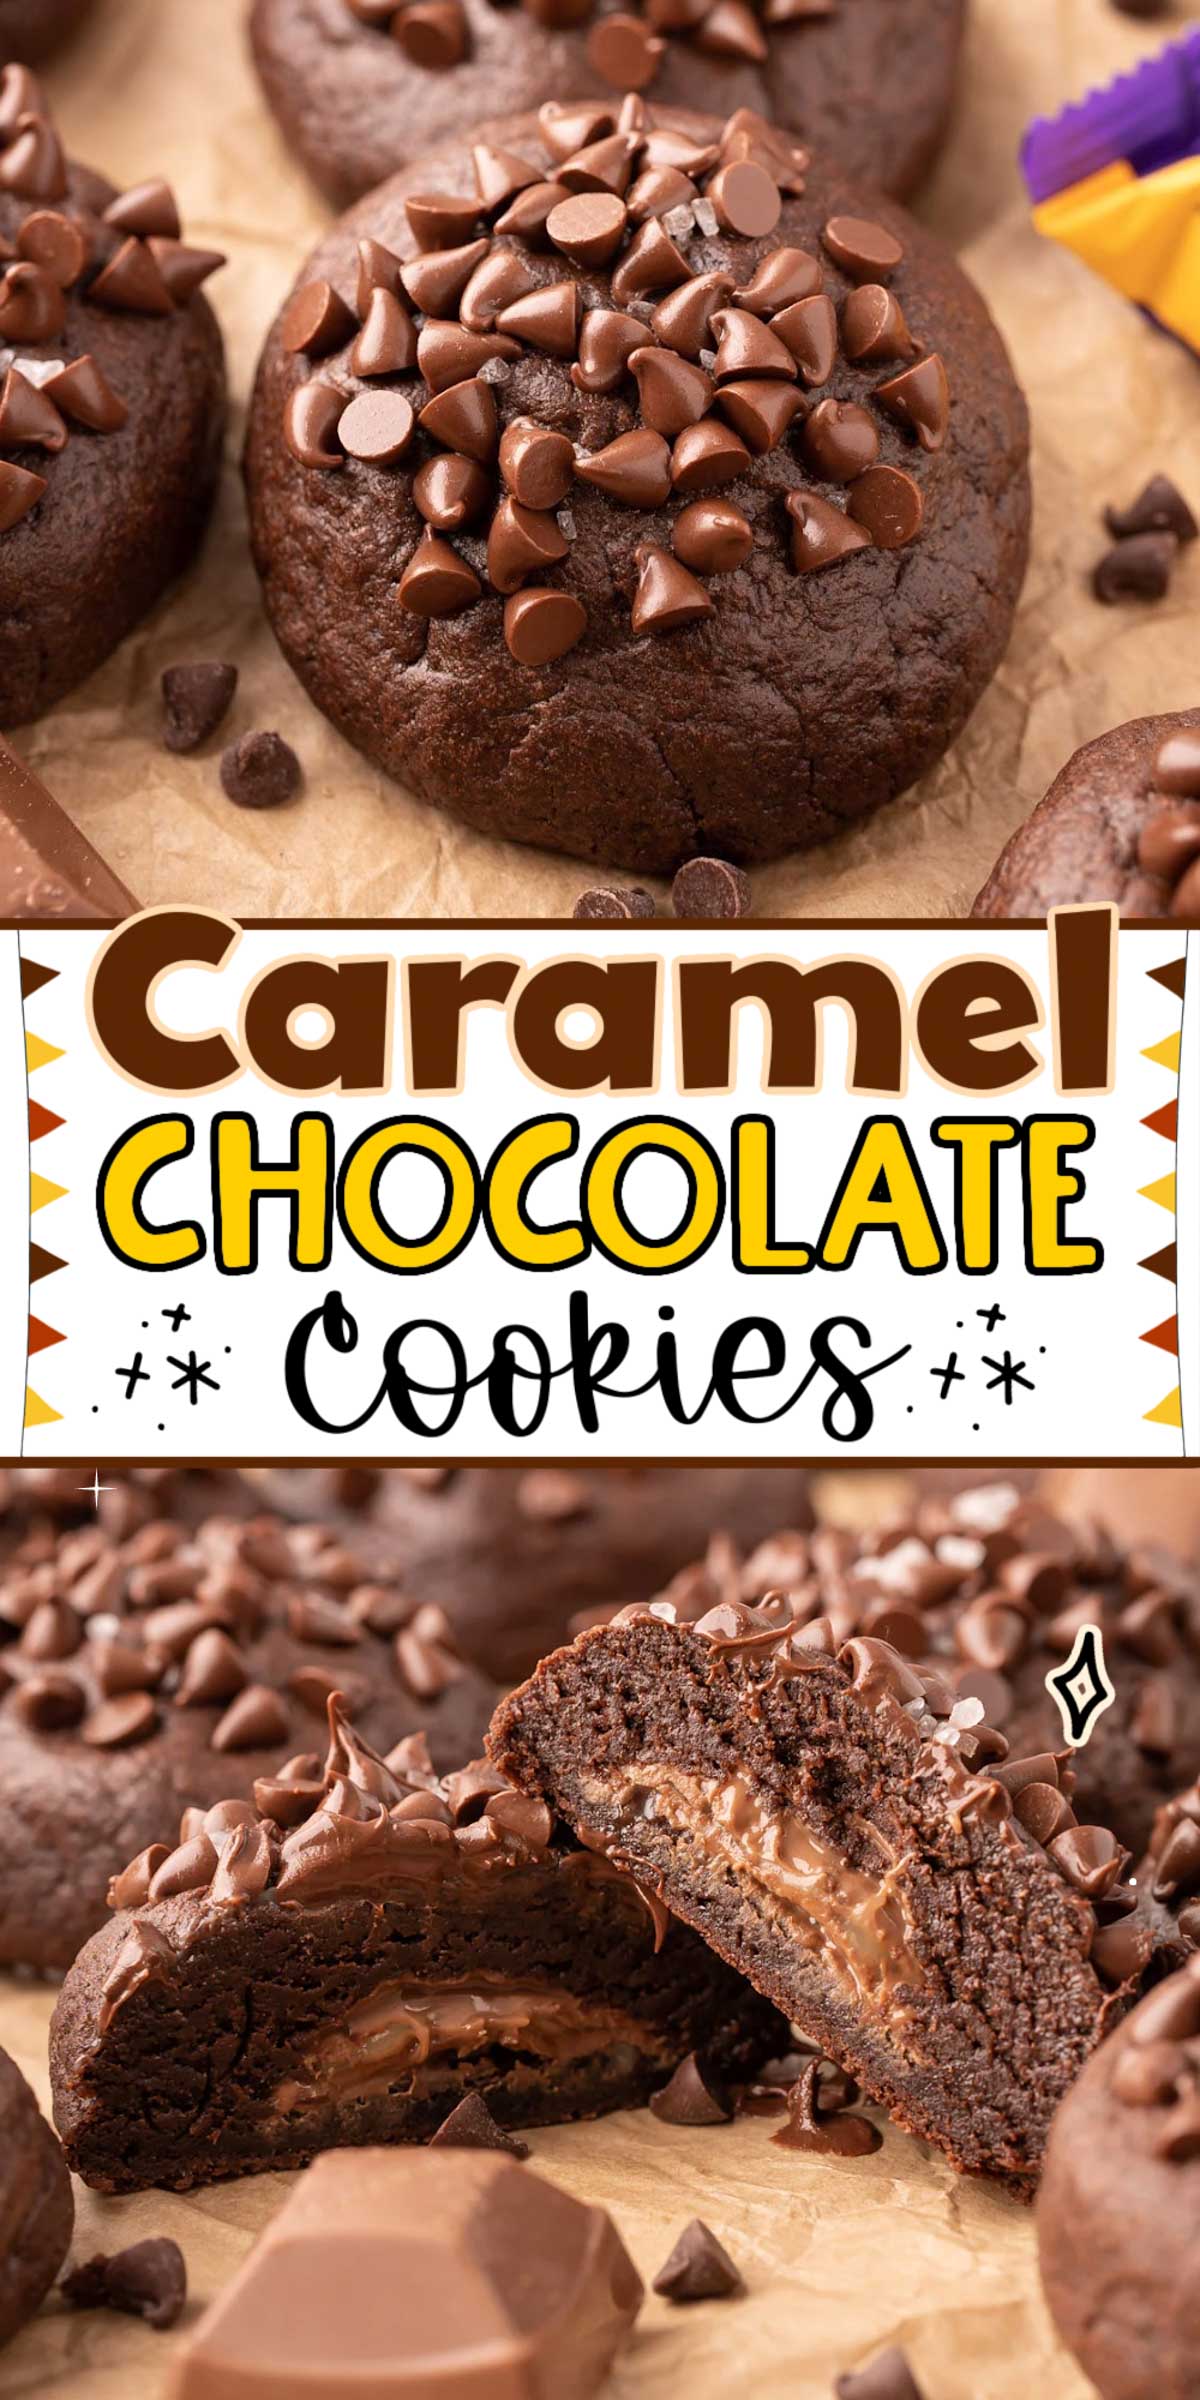 Chocolate Caramel Cookies are soft and fudgy chocolate cookies with a surprise caramel candy center. A delicious gourmet-style cookie that's easy to make at home with these step-by-step instructions! via @sugarandsoulco